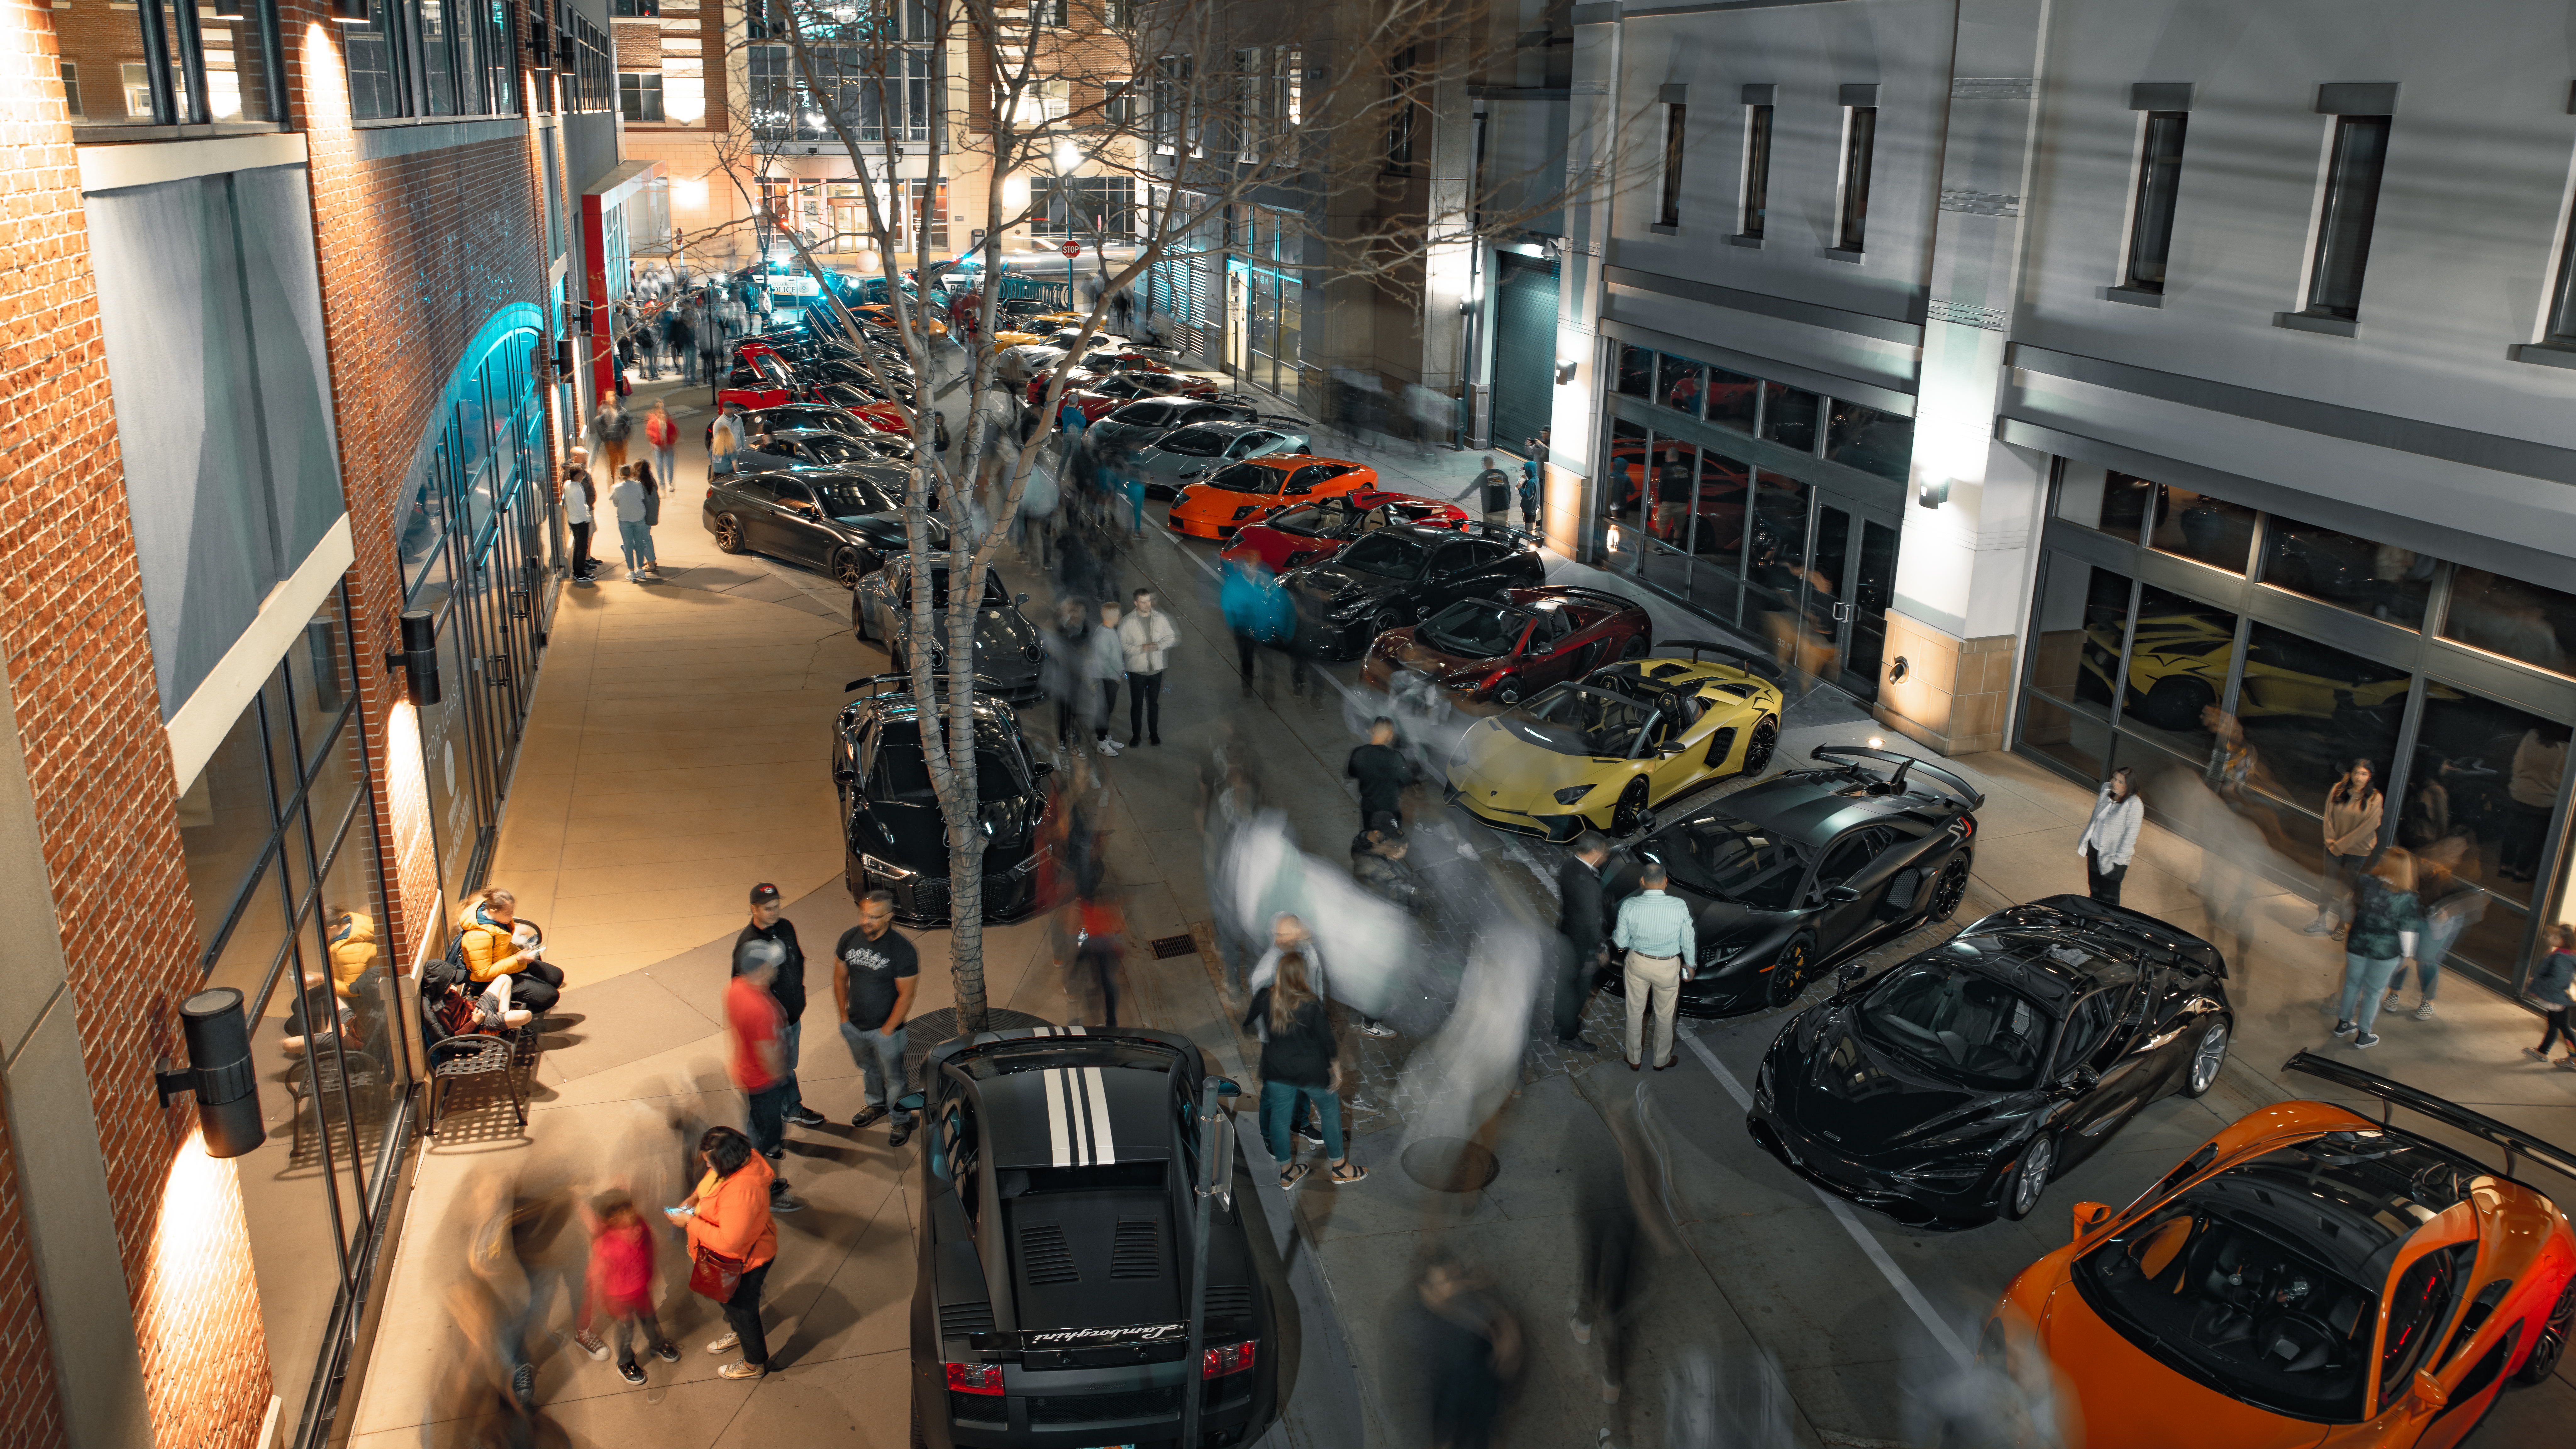 Attendees gather round supercars lined on both sides of the street in Salt Lake City